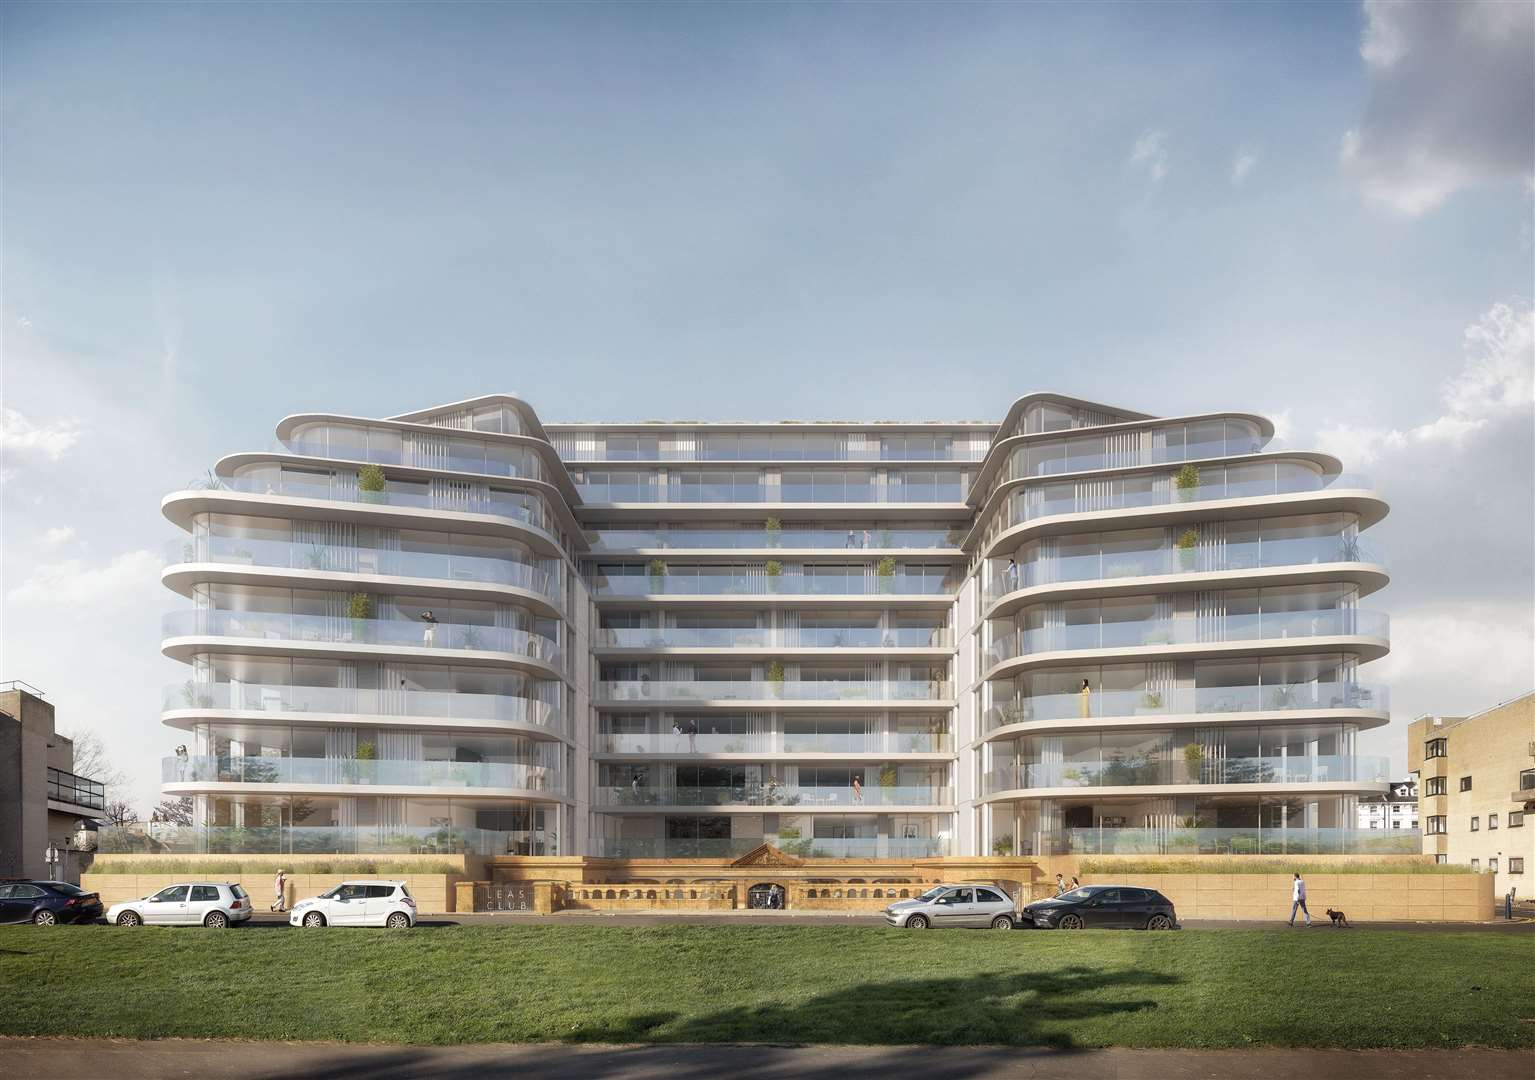 CGI of the proposed development at the Leas Pavilion in Folkestone. Image: Hollaway